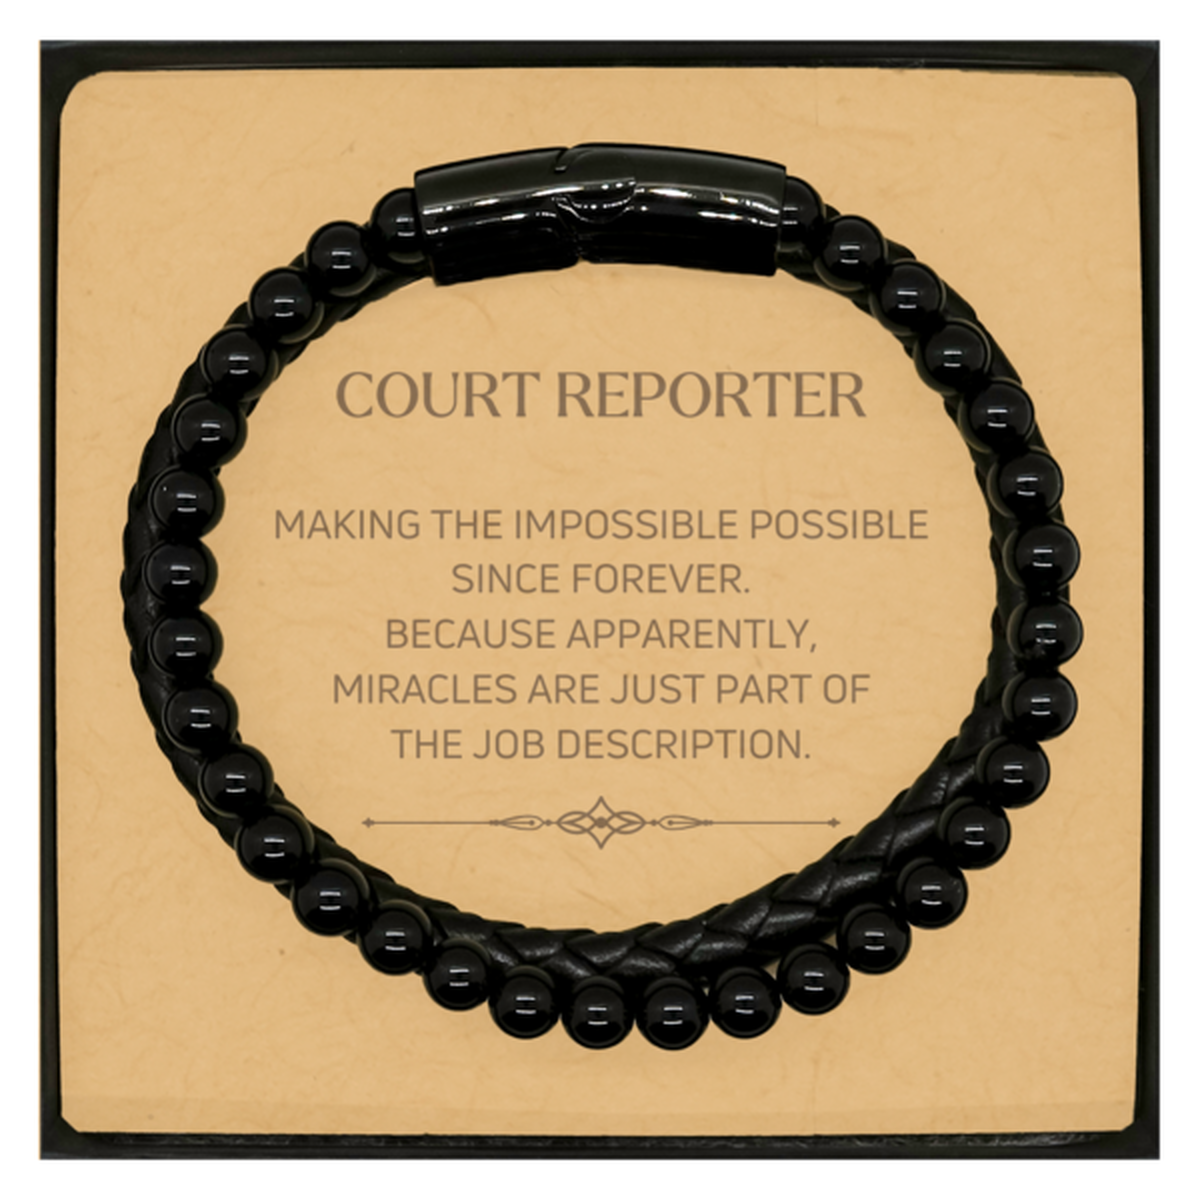 Funny Court Reporter Gifts, Miracles are just part of the job description, Inspirational Birthday Christmas Stone Leather Bracelets For Court Reporter, Men, Women, Coworkers, Friends, Boss